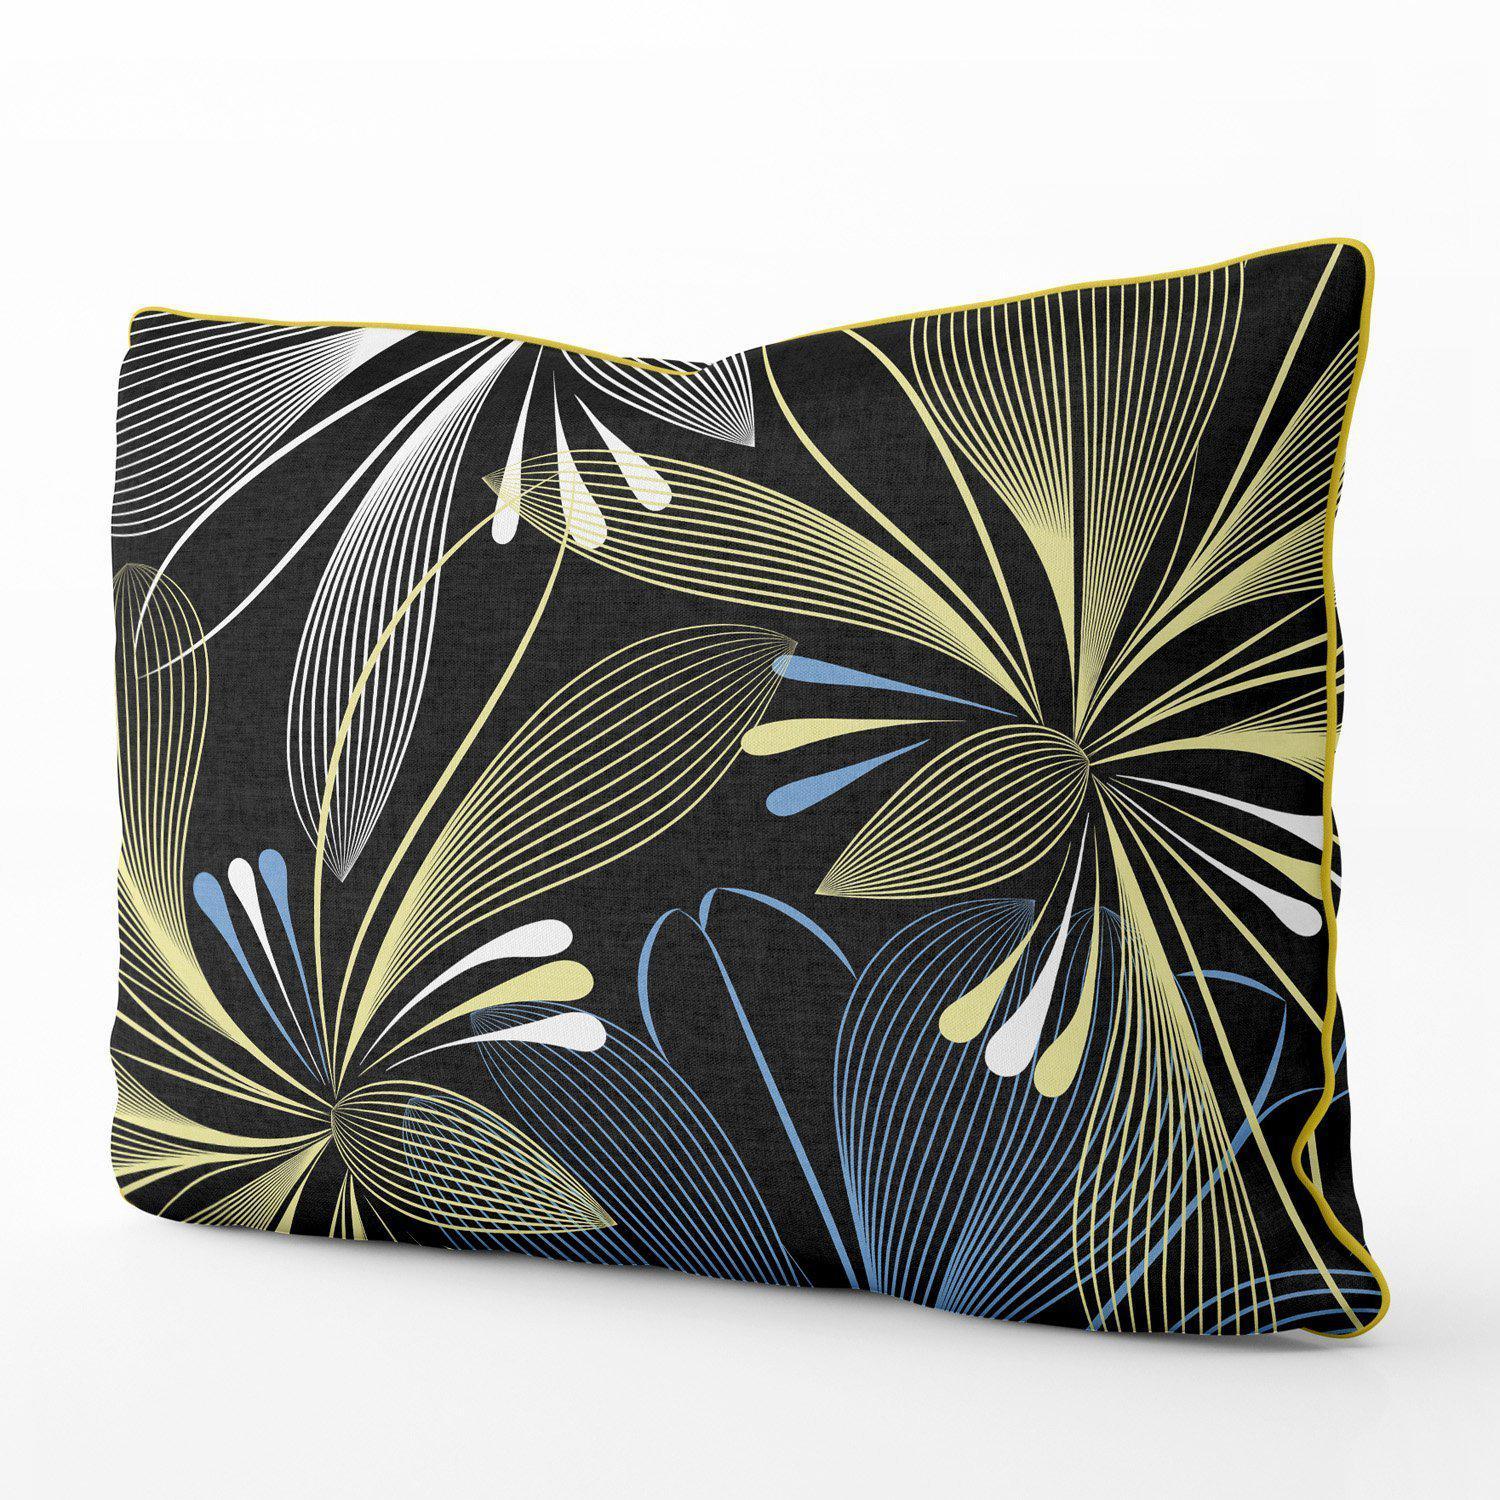 Flora Explosion ( Black) - Funky Art Cushion - Perfect Day - House Of Turnowsky Pillows - Handmade Cushions UK - WeLoveCushions